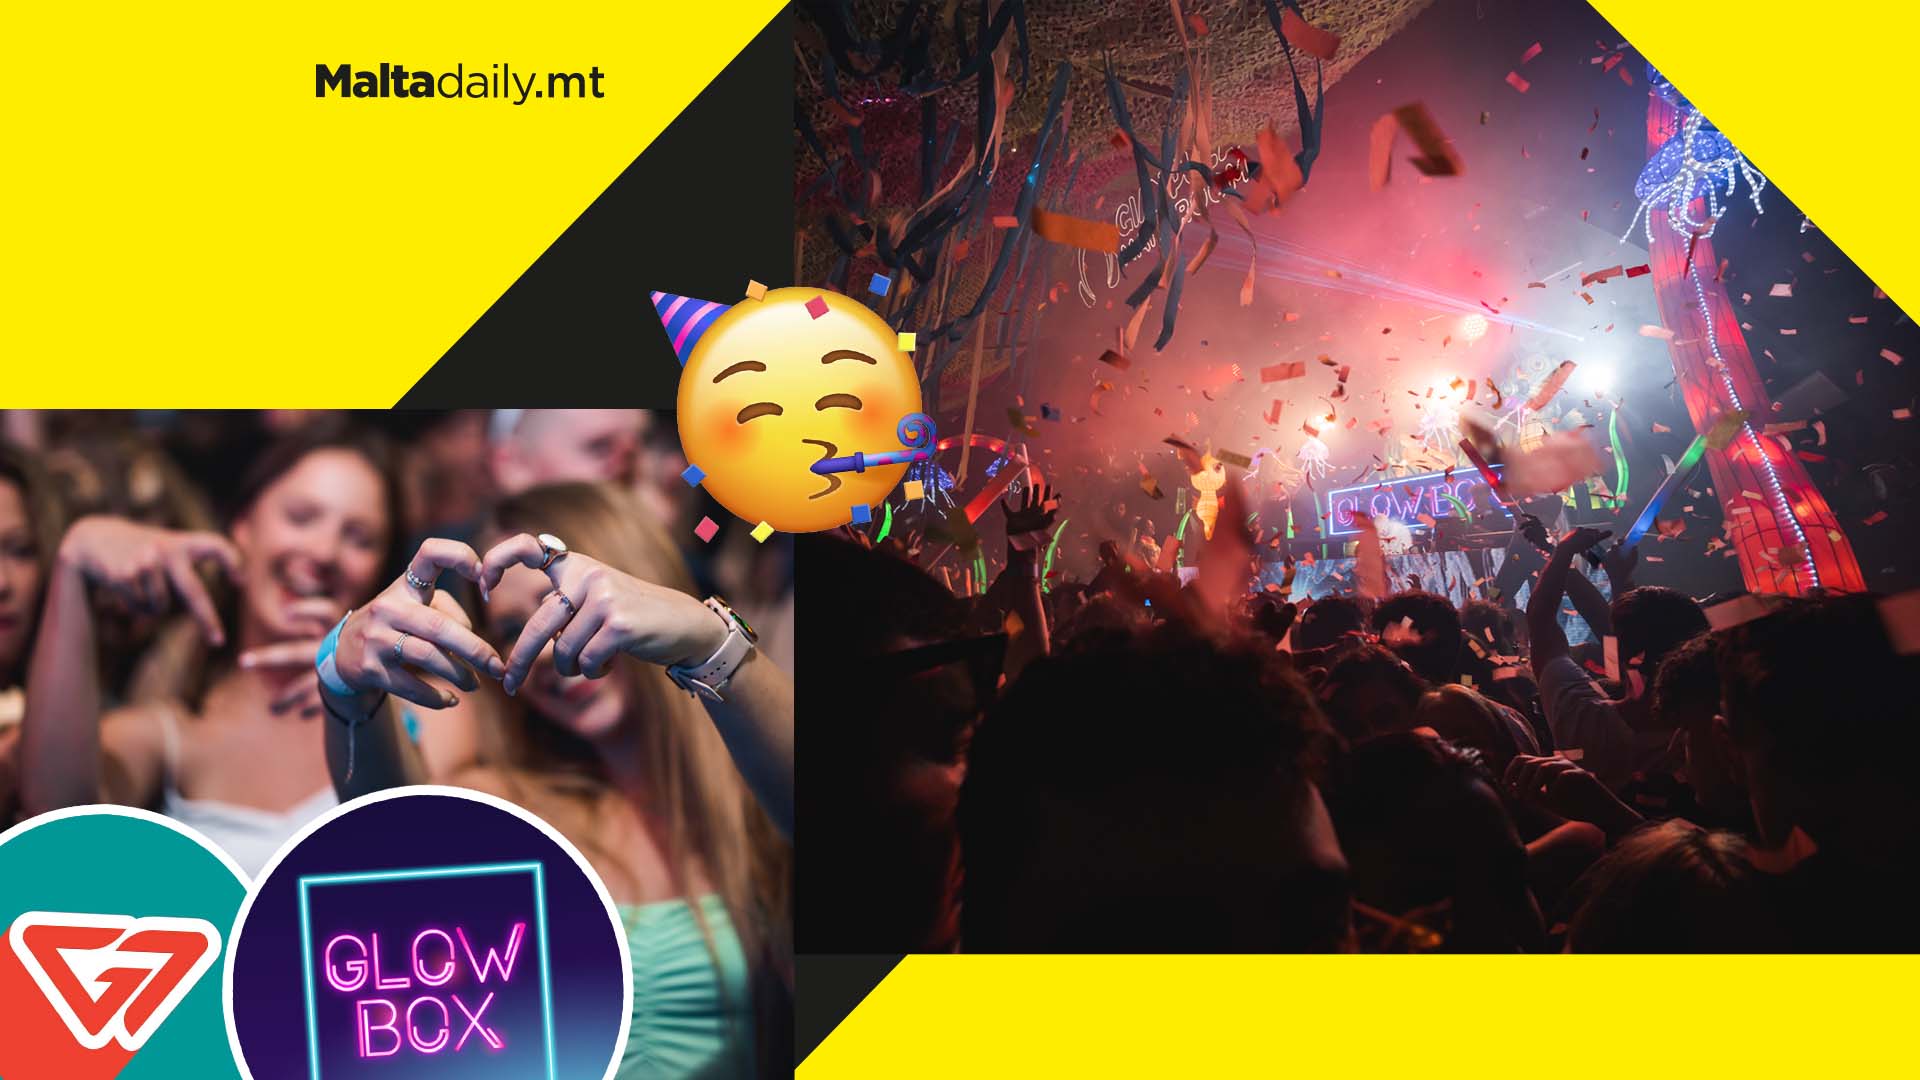 PARTY TIME: End the summer with confetti showers & crazy vibes at Glow Box Fiesta Edition